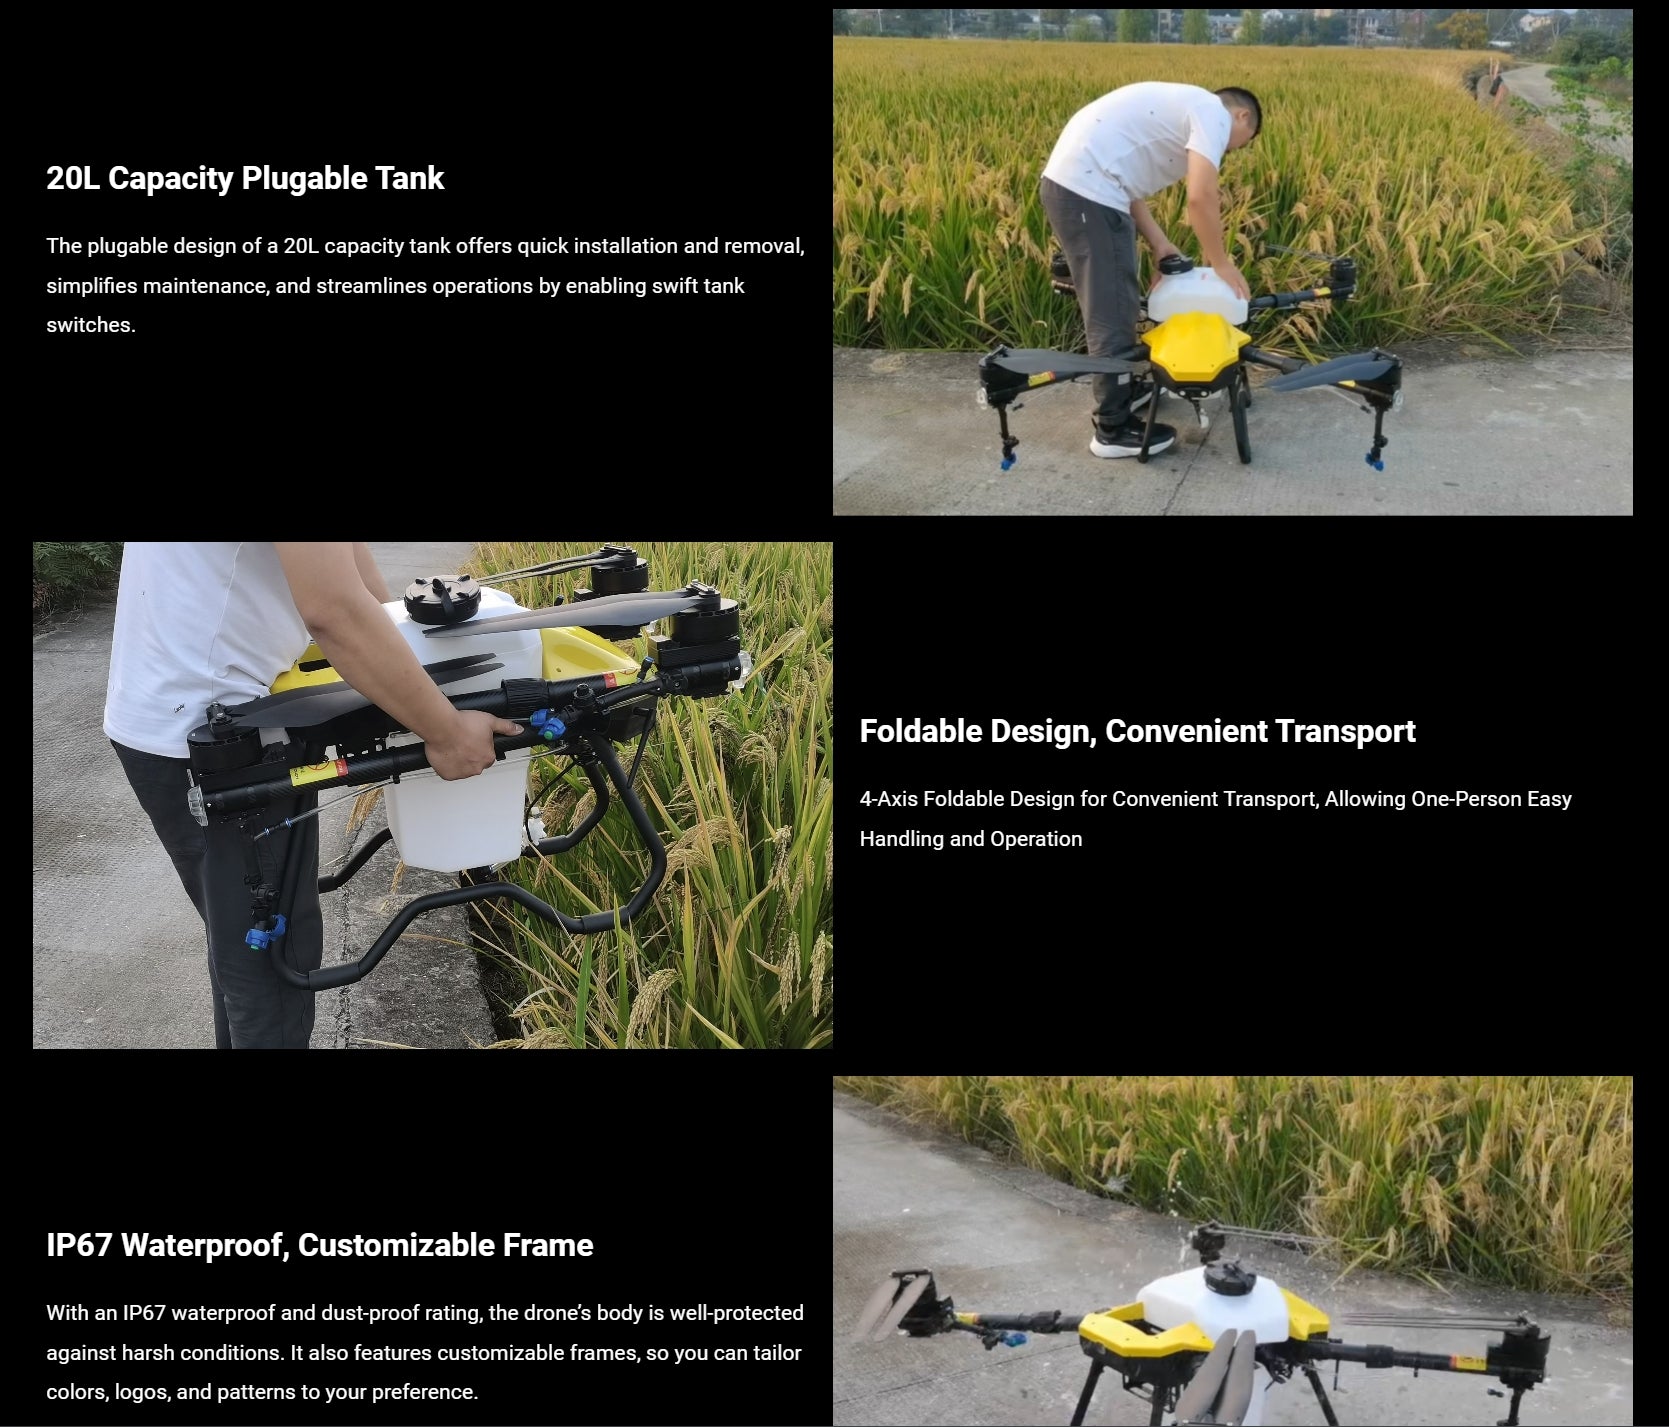 H40X Agriculture Drone, a 20L capacity plugable tank offers quick installation and removal, simplifies maintenance; and